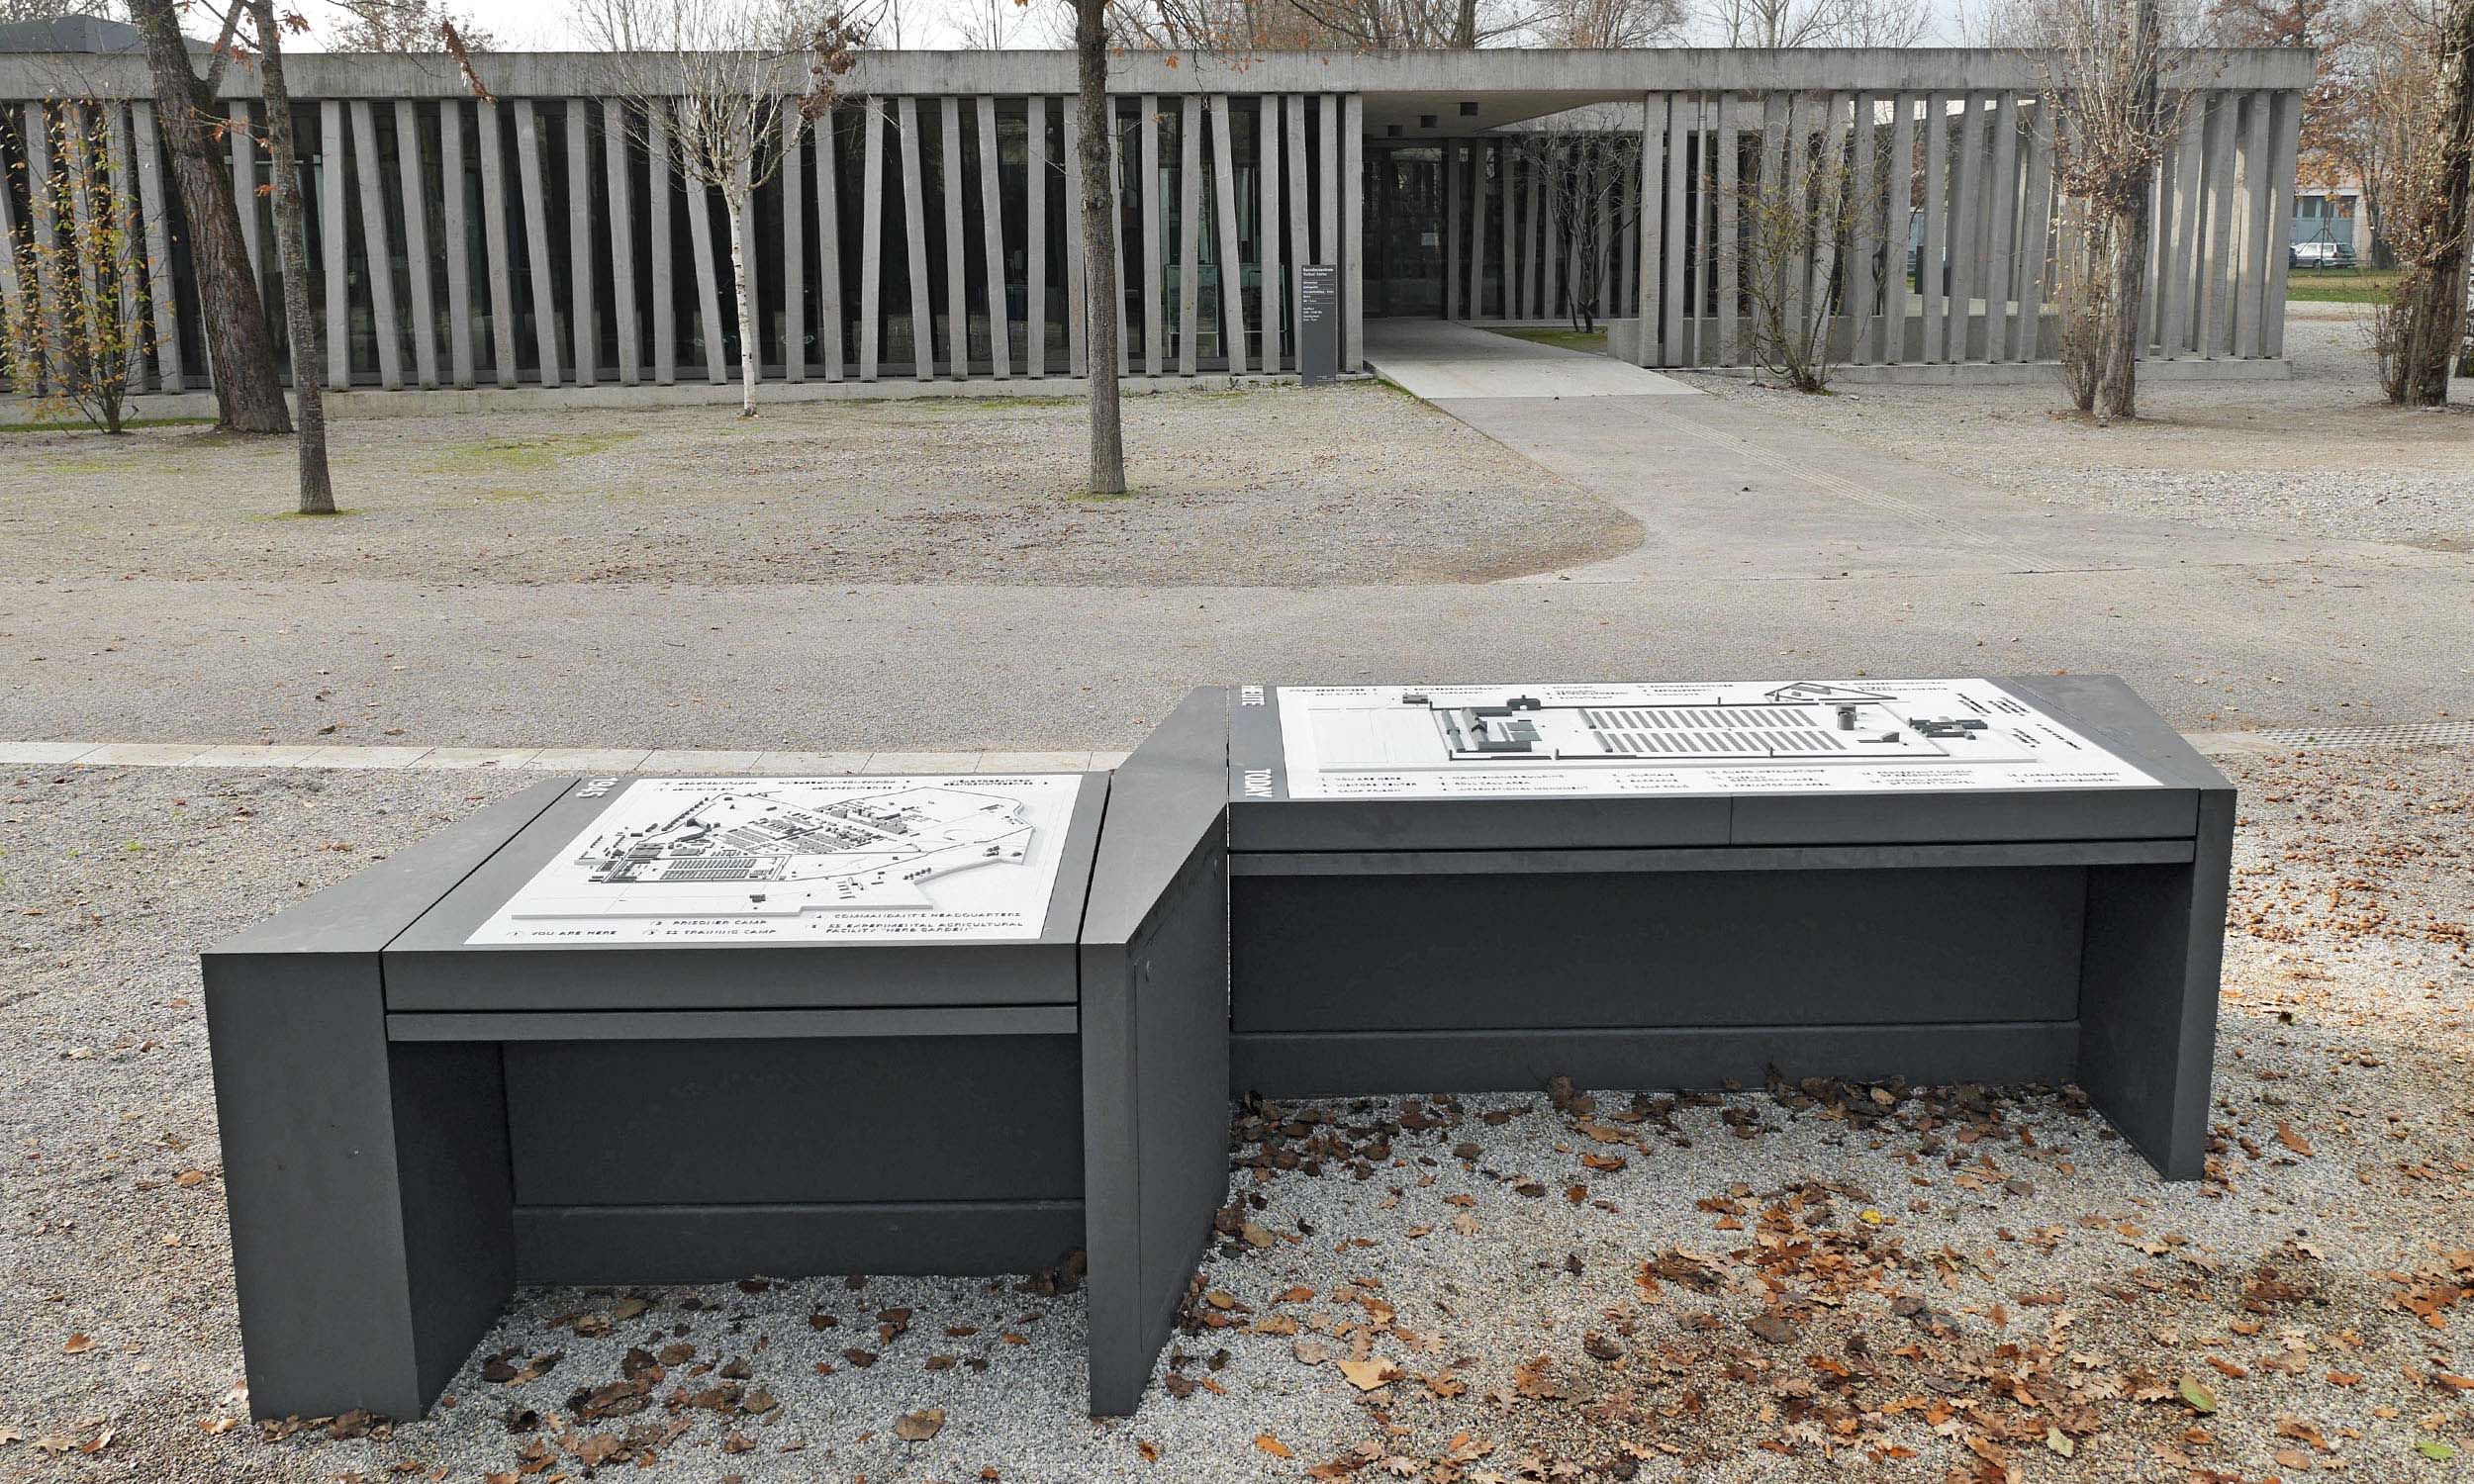 Photo of the two installed tactile models in front of the entrance to the Dachau Concentration Camp Memorial Site.